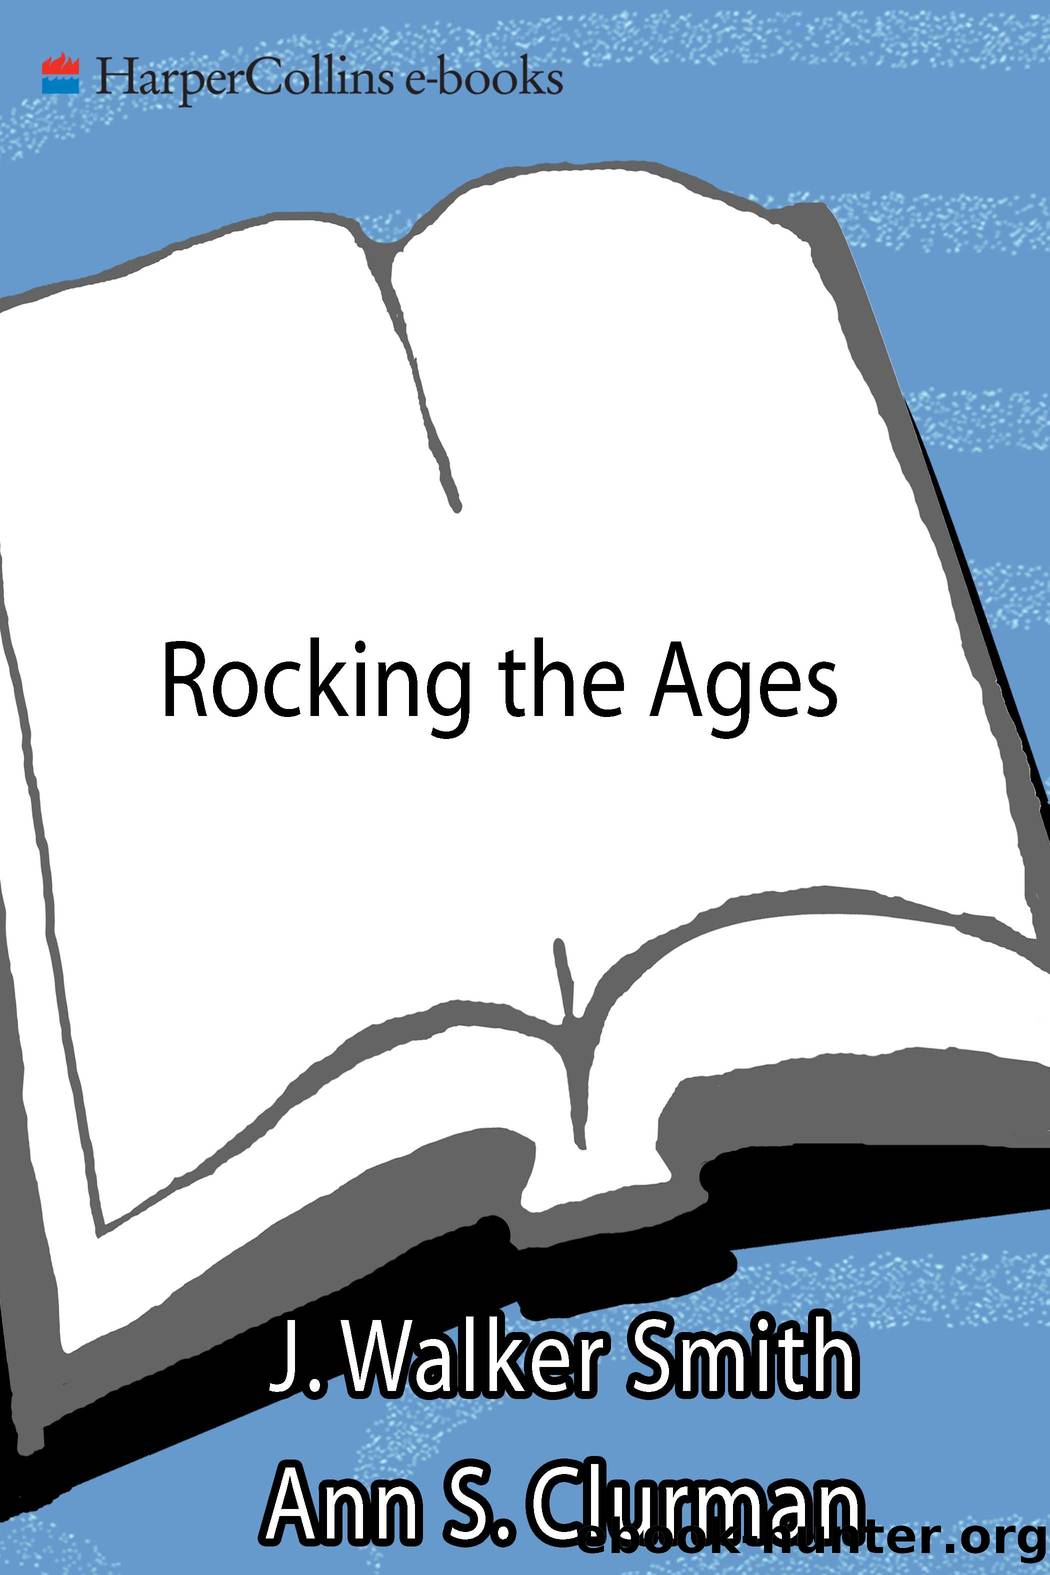 Rocking the Ages by J. Walker Smith